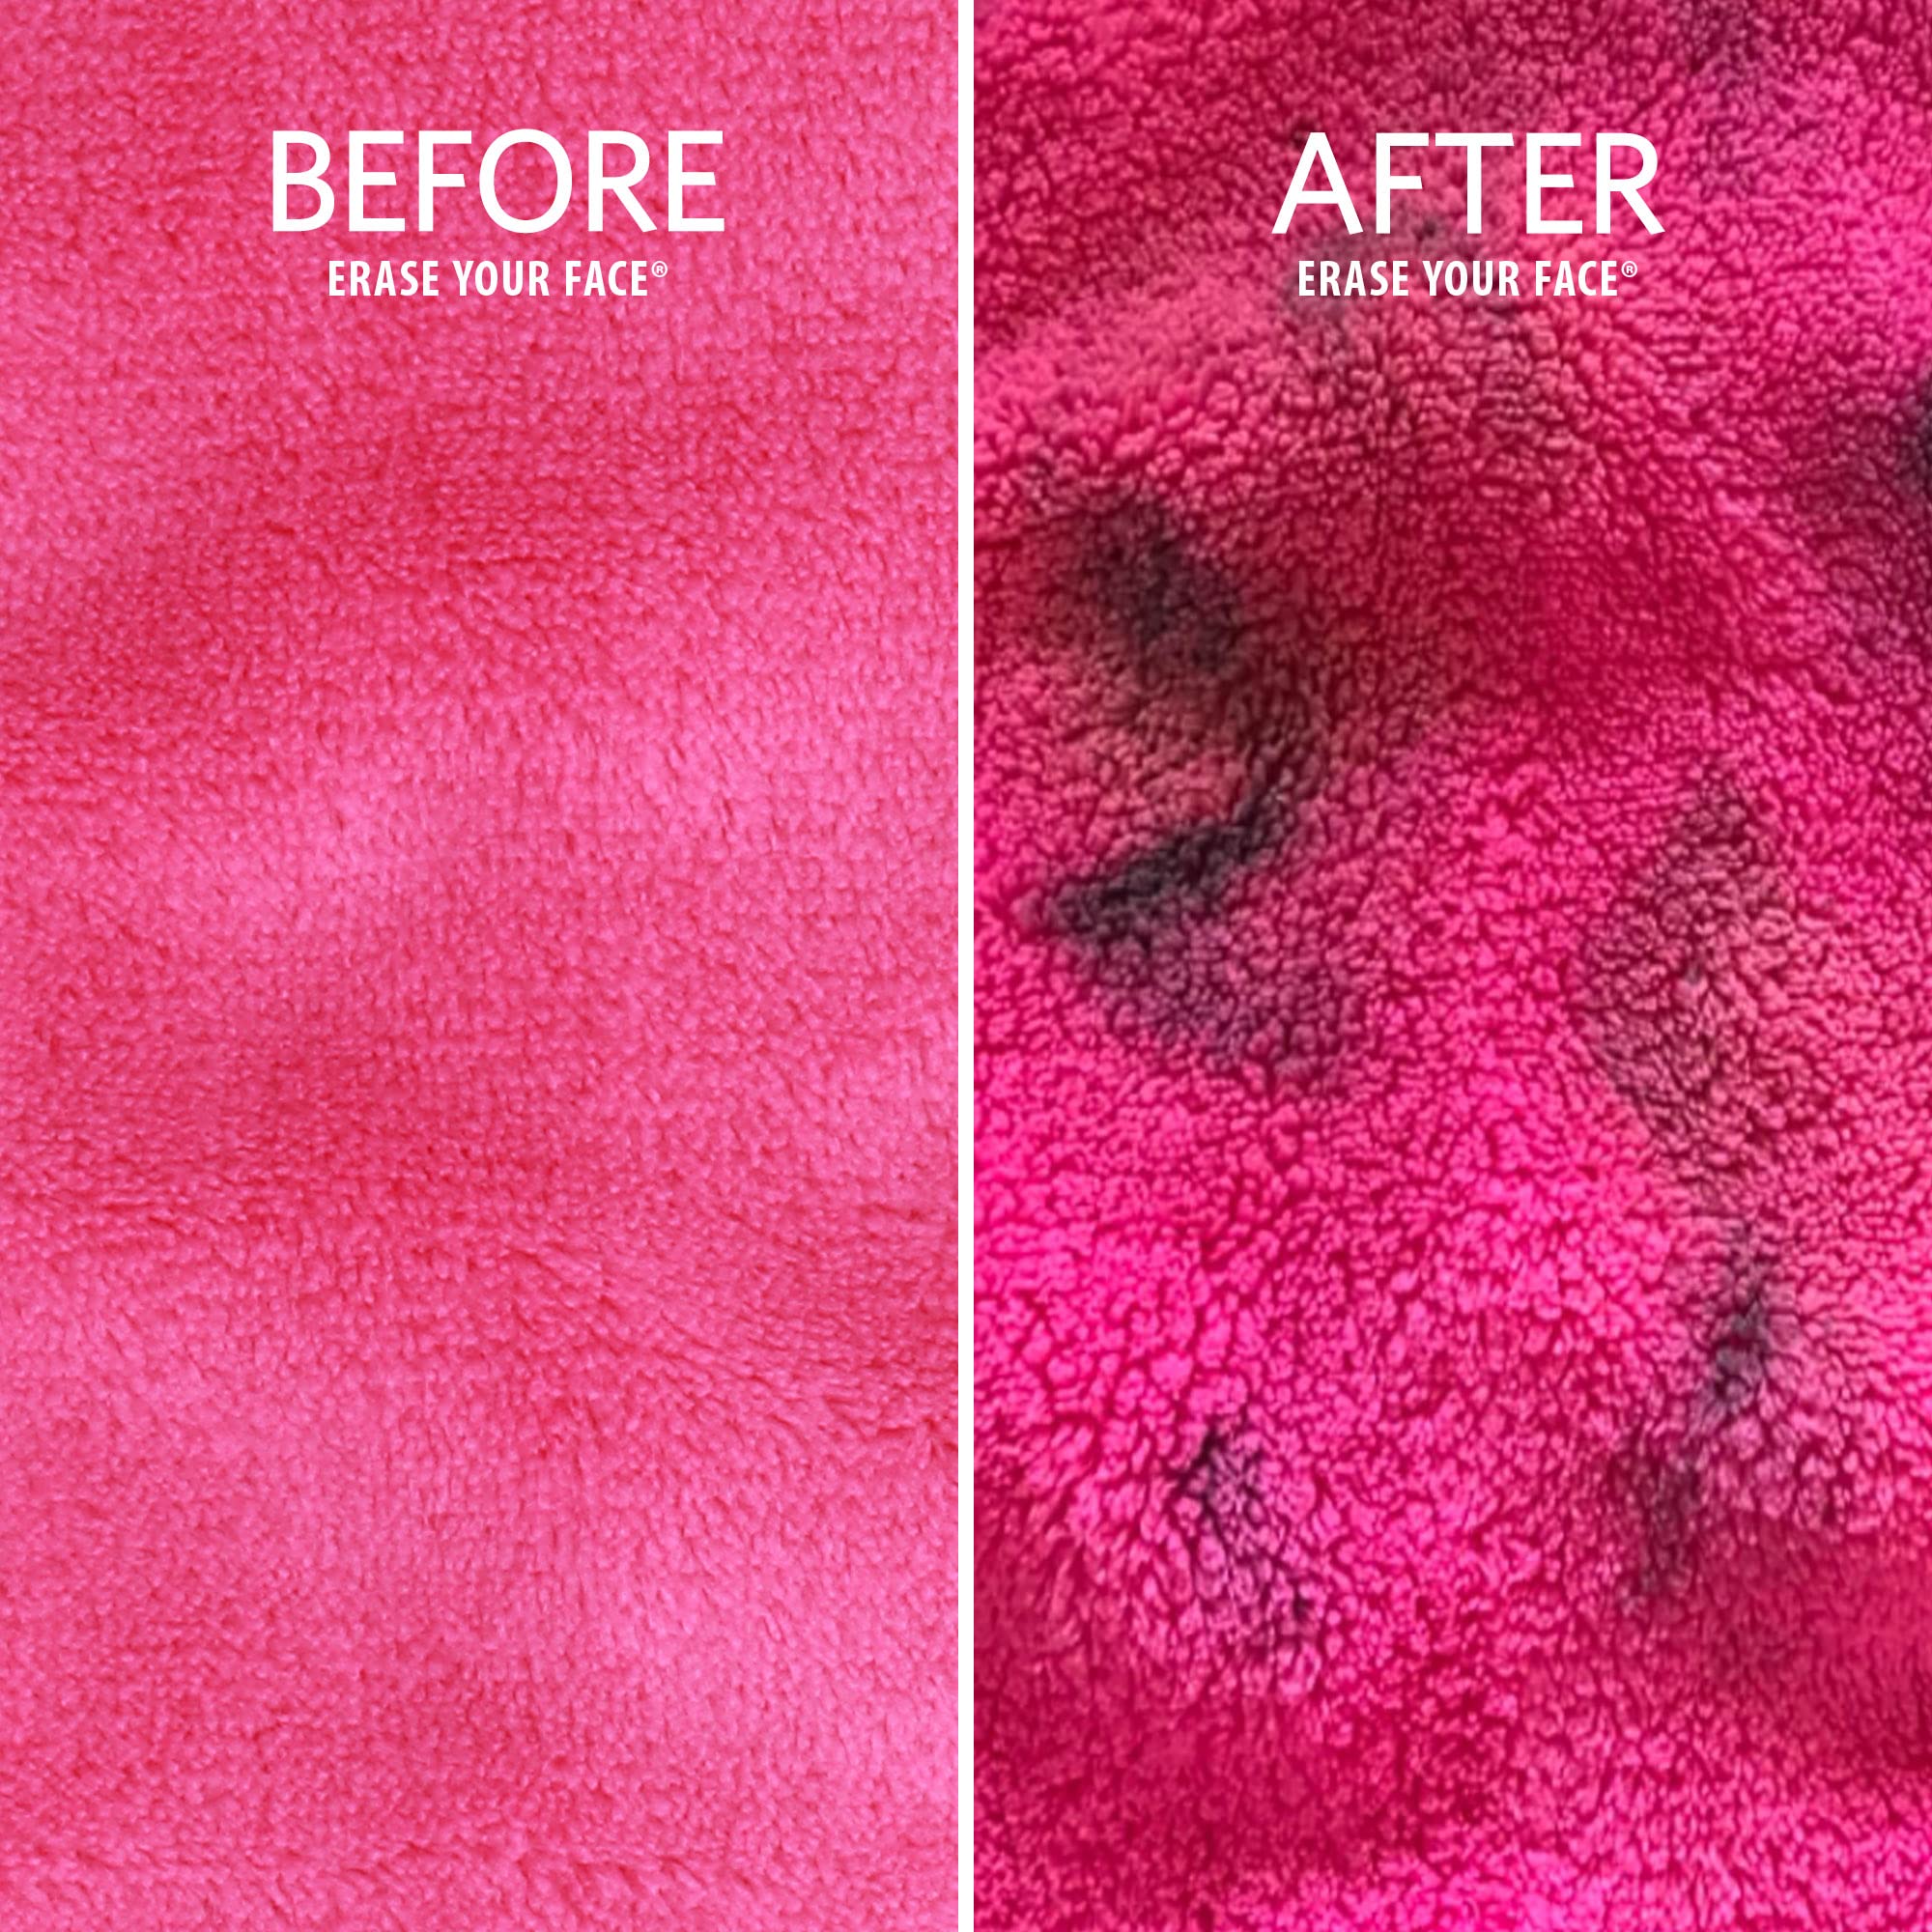 Make-up Removing Cloths 4 Count, Erase Your Face By Danielle Enterprises Enterprises Enterprises